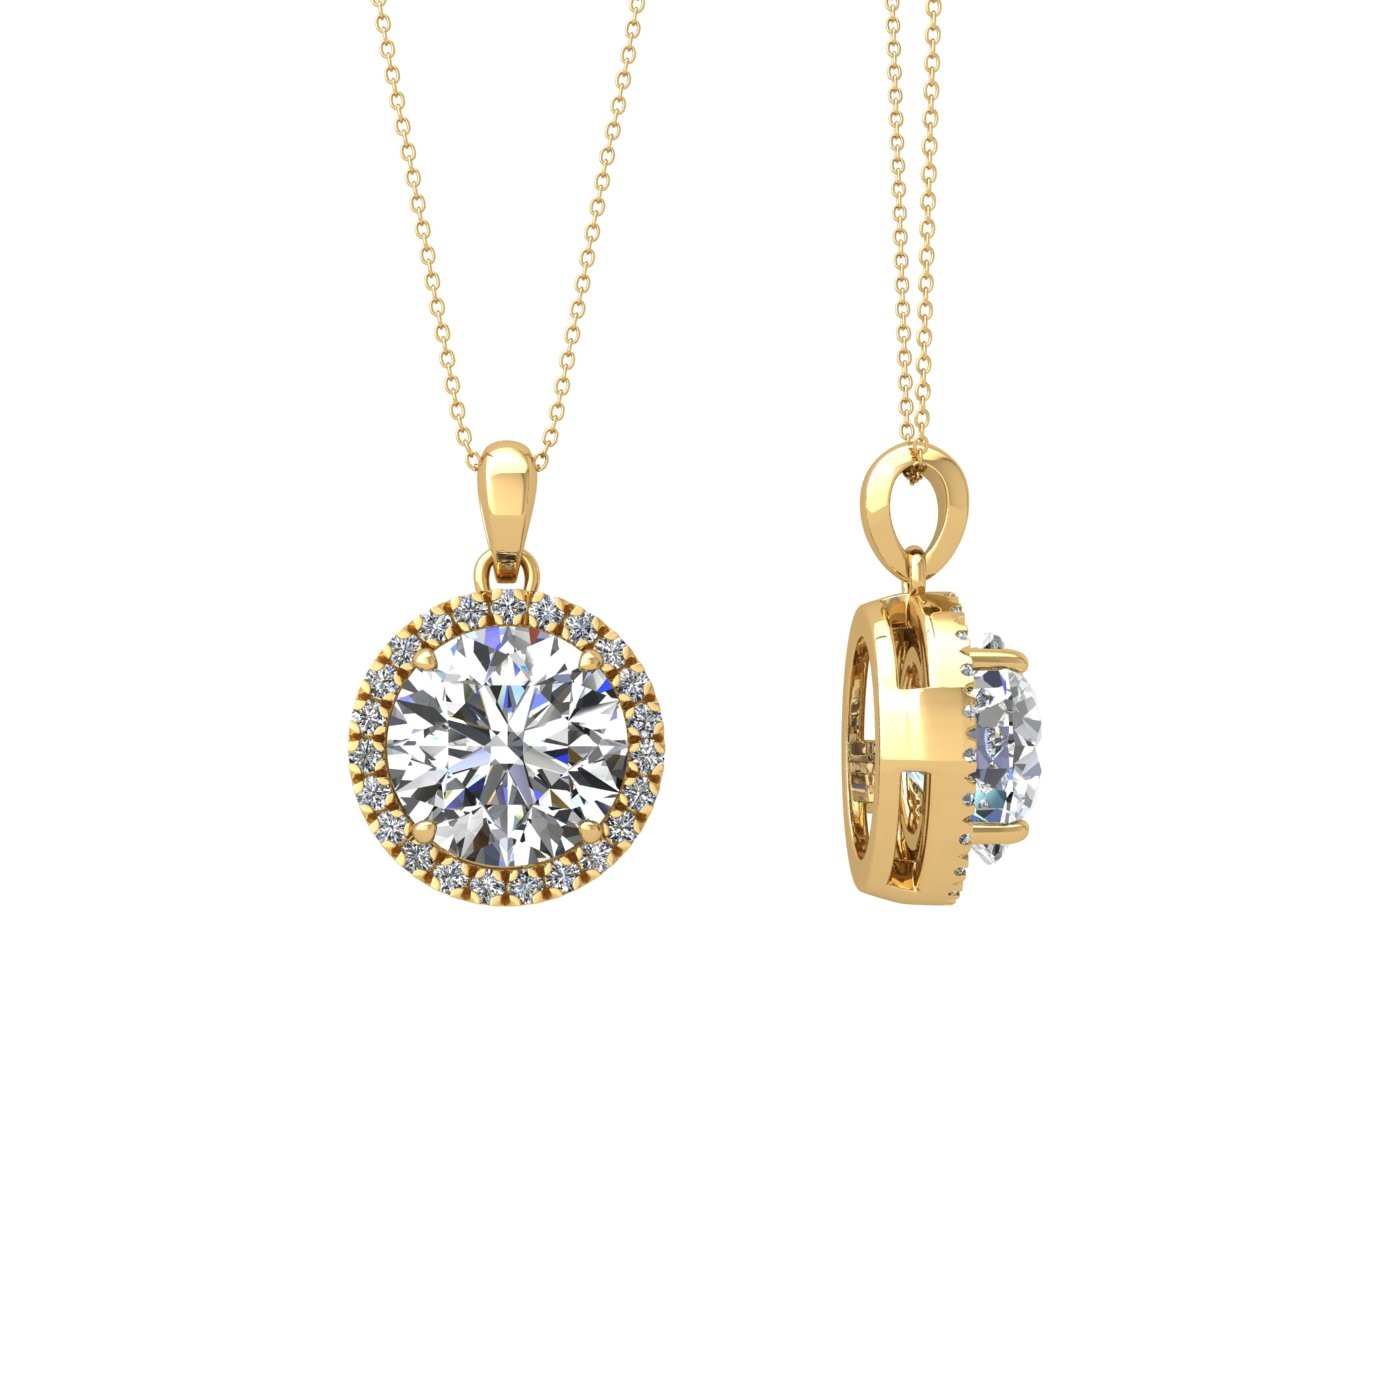 18k yellow gold  0,7 ct 4 prong round shape diamond pendant with diamond pavÉ set halo including chain seperate from the pendant Photos & images